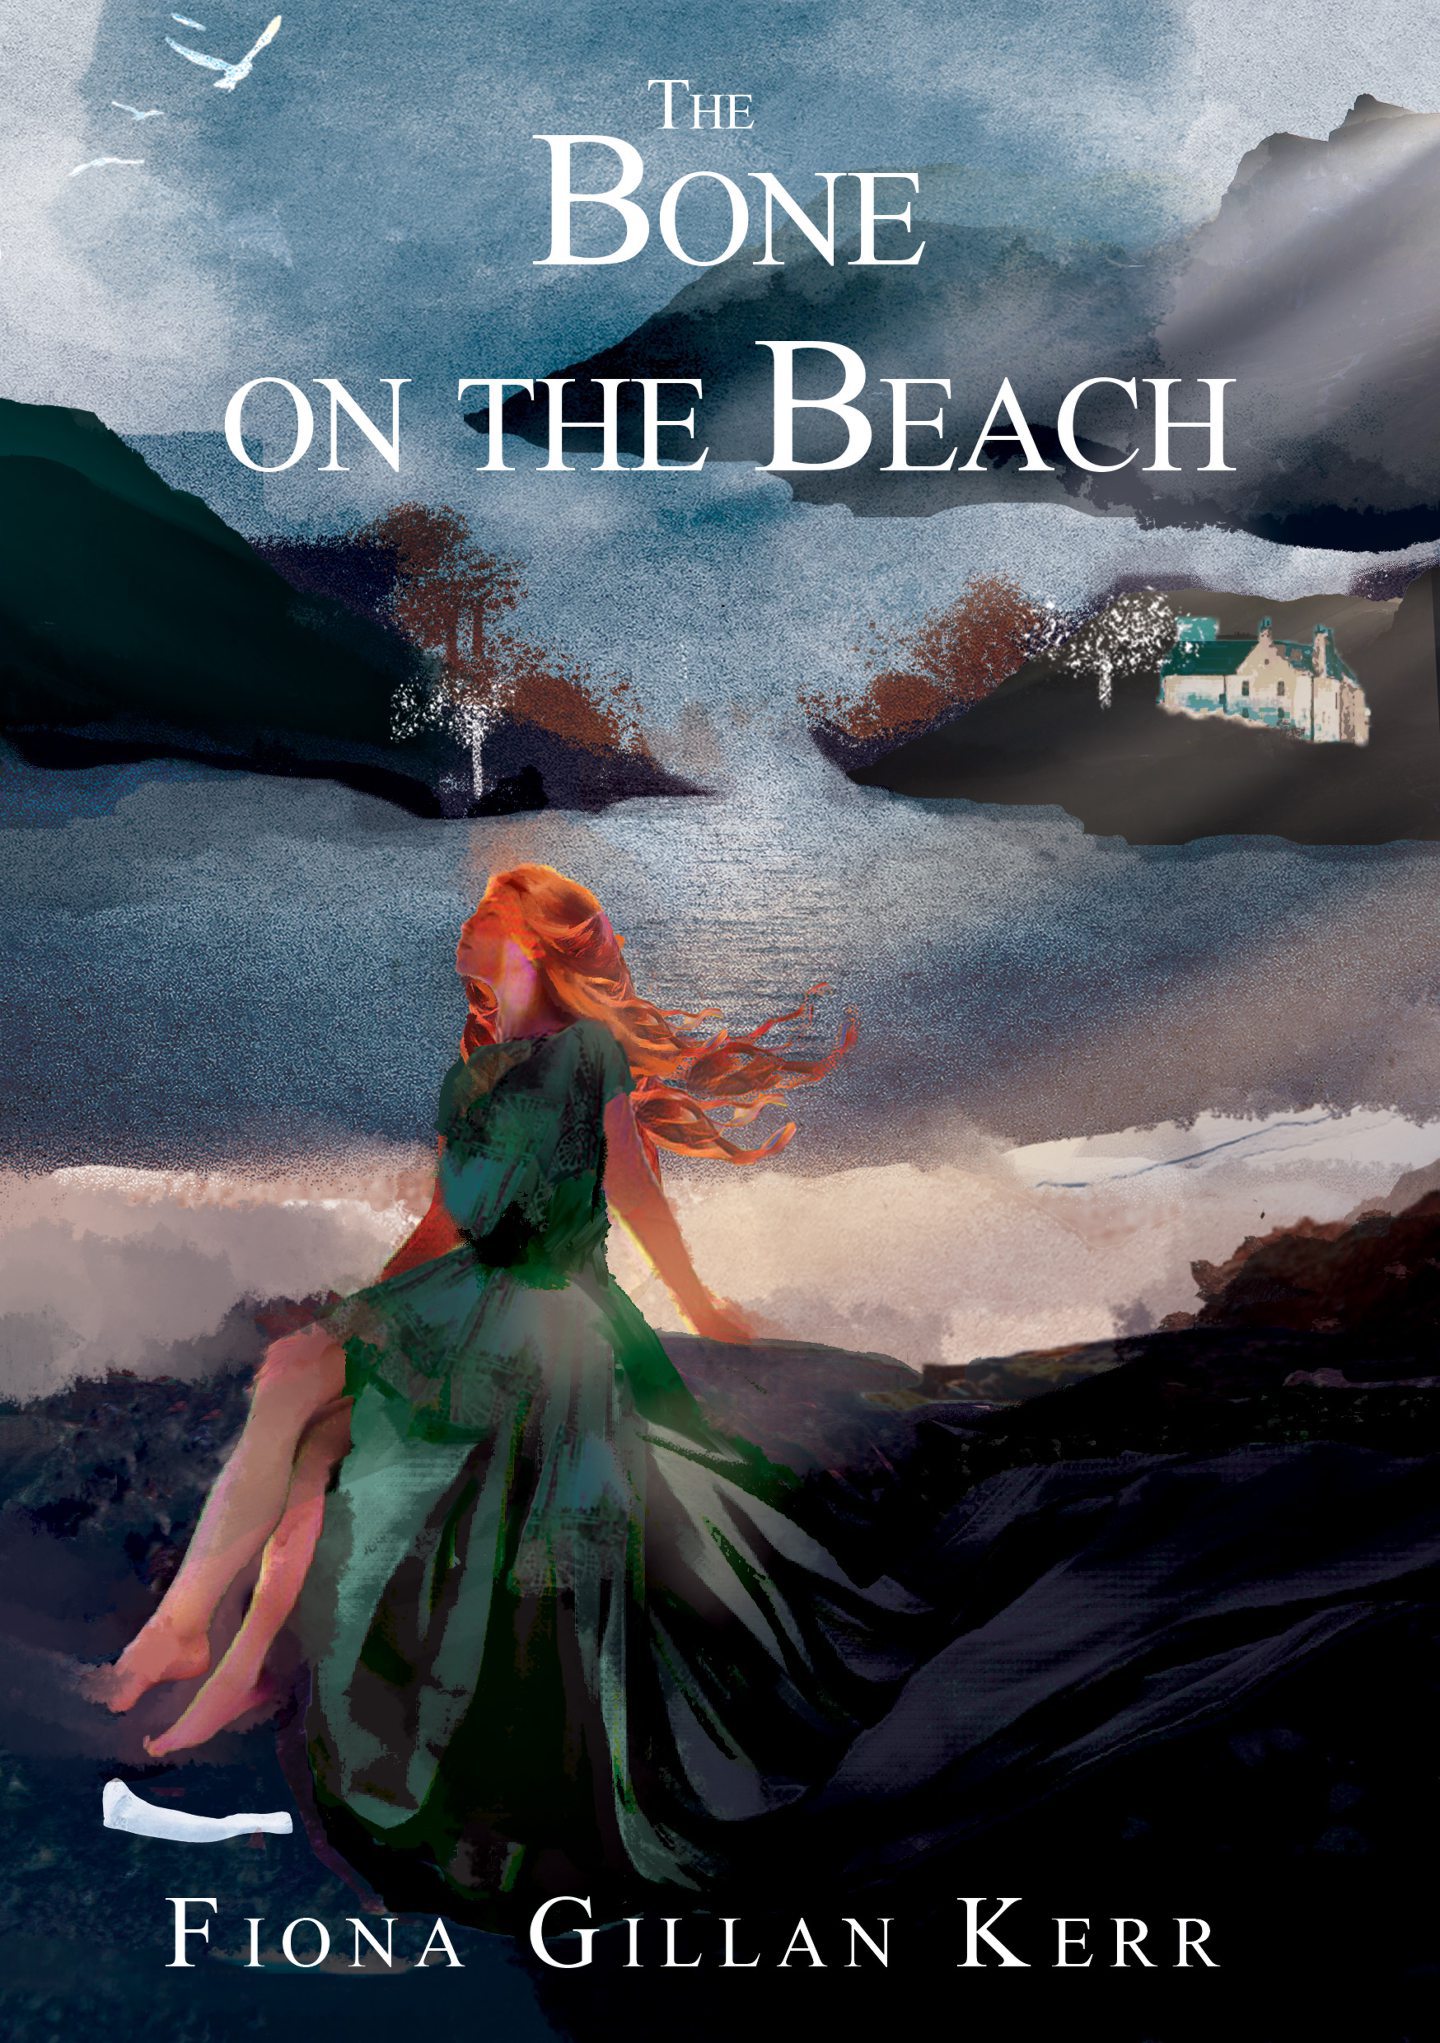 Image shows the cover of The Bone on the Beach by Fiona Gillan Kerr.The illustration is of a young woman with long auburn hair sitting on a cliff above a beach. 